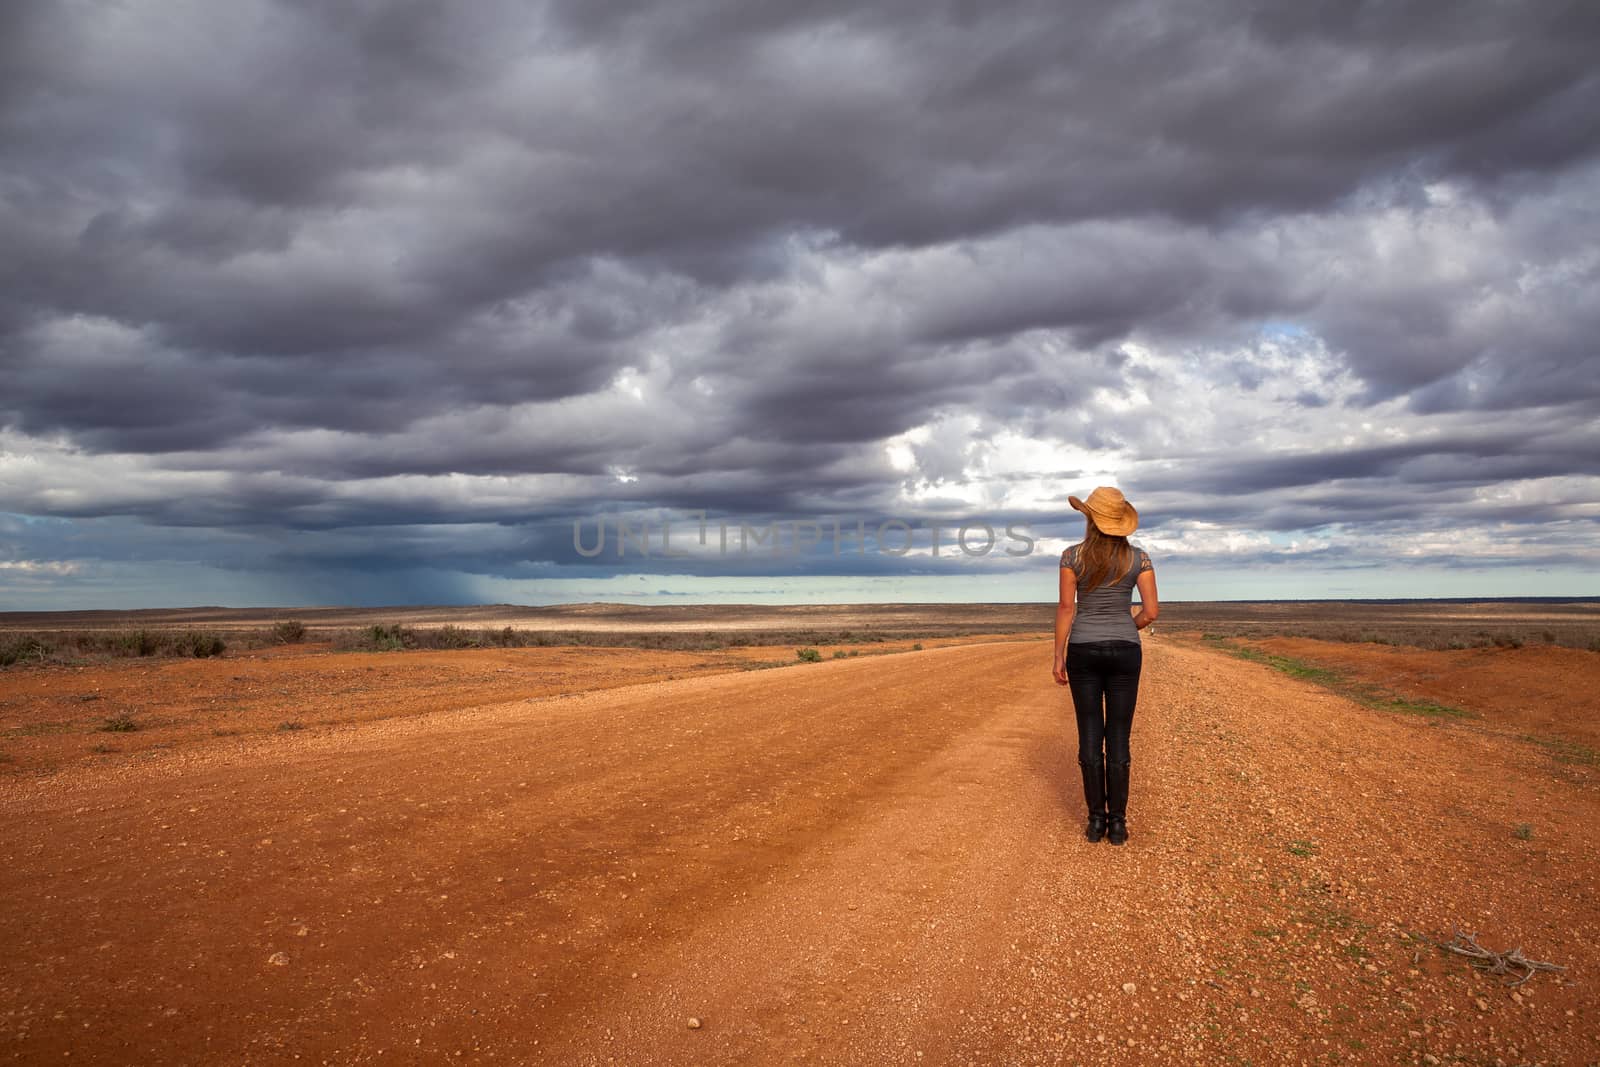 Farm girl watching storm over the arid desert by lovleah